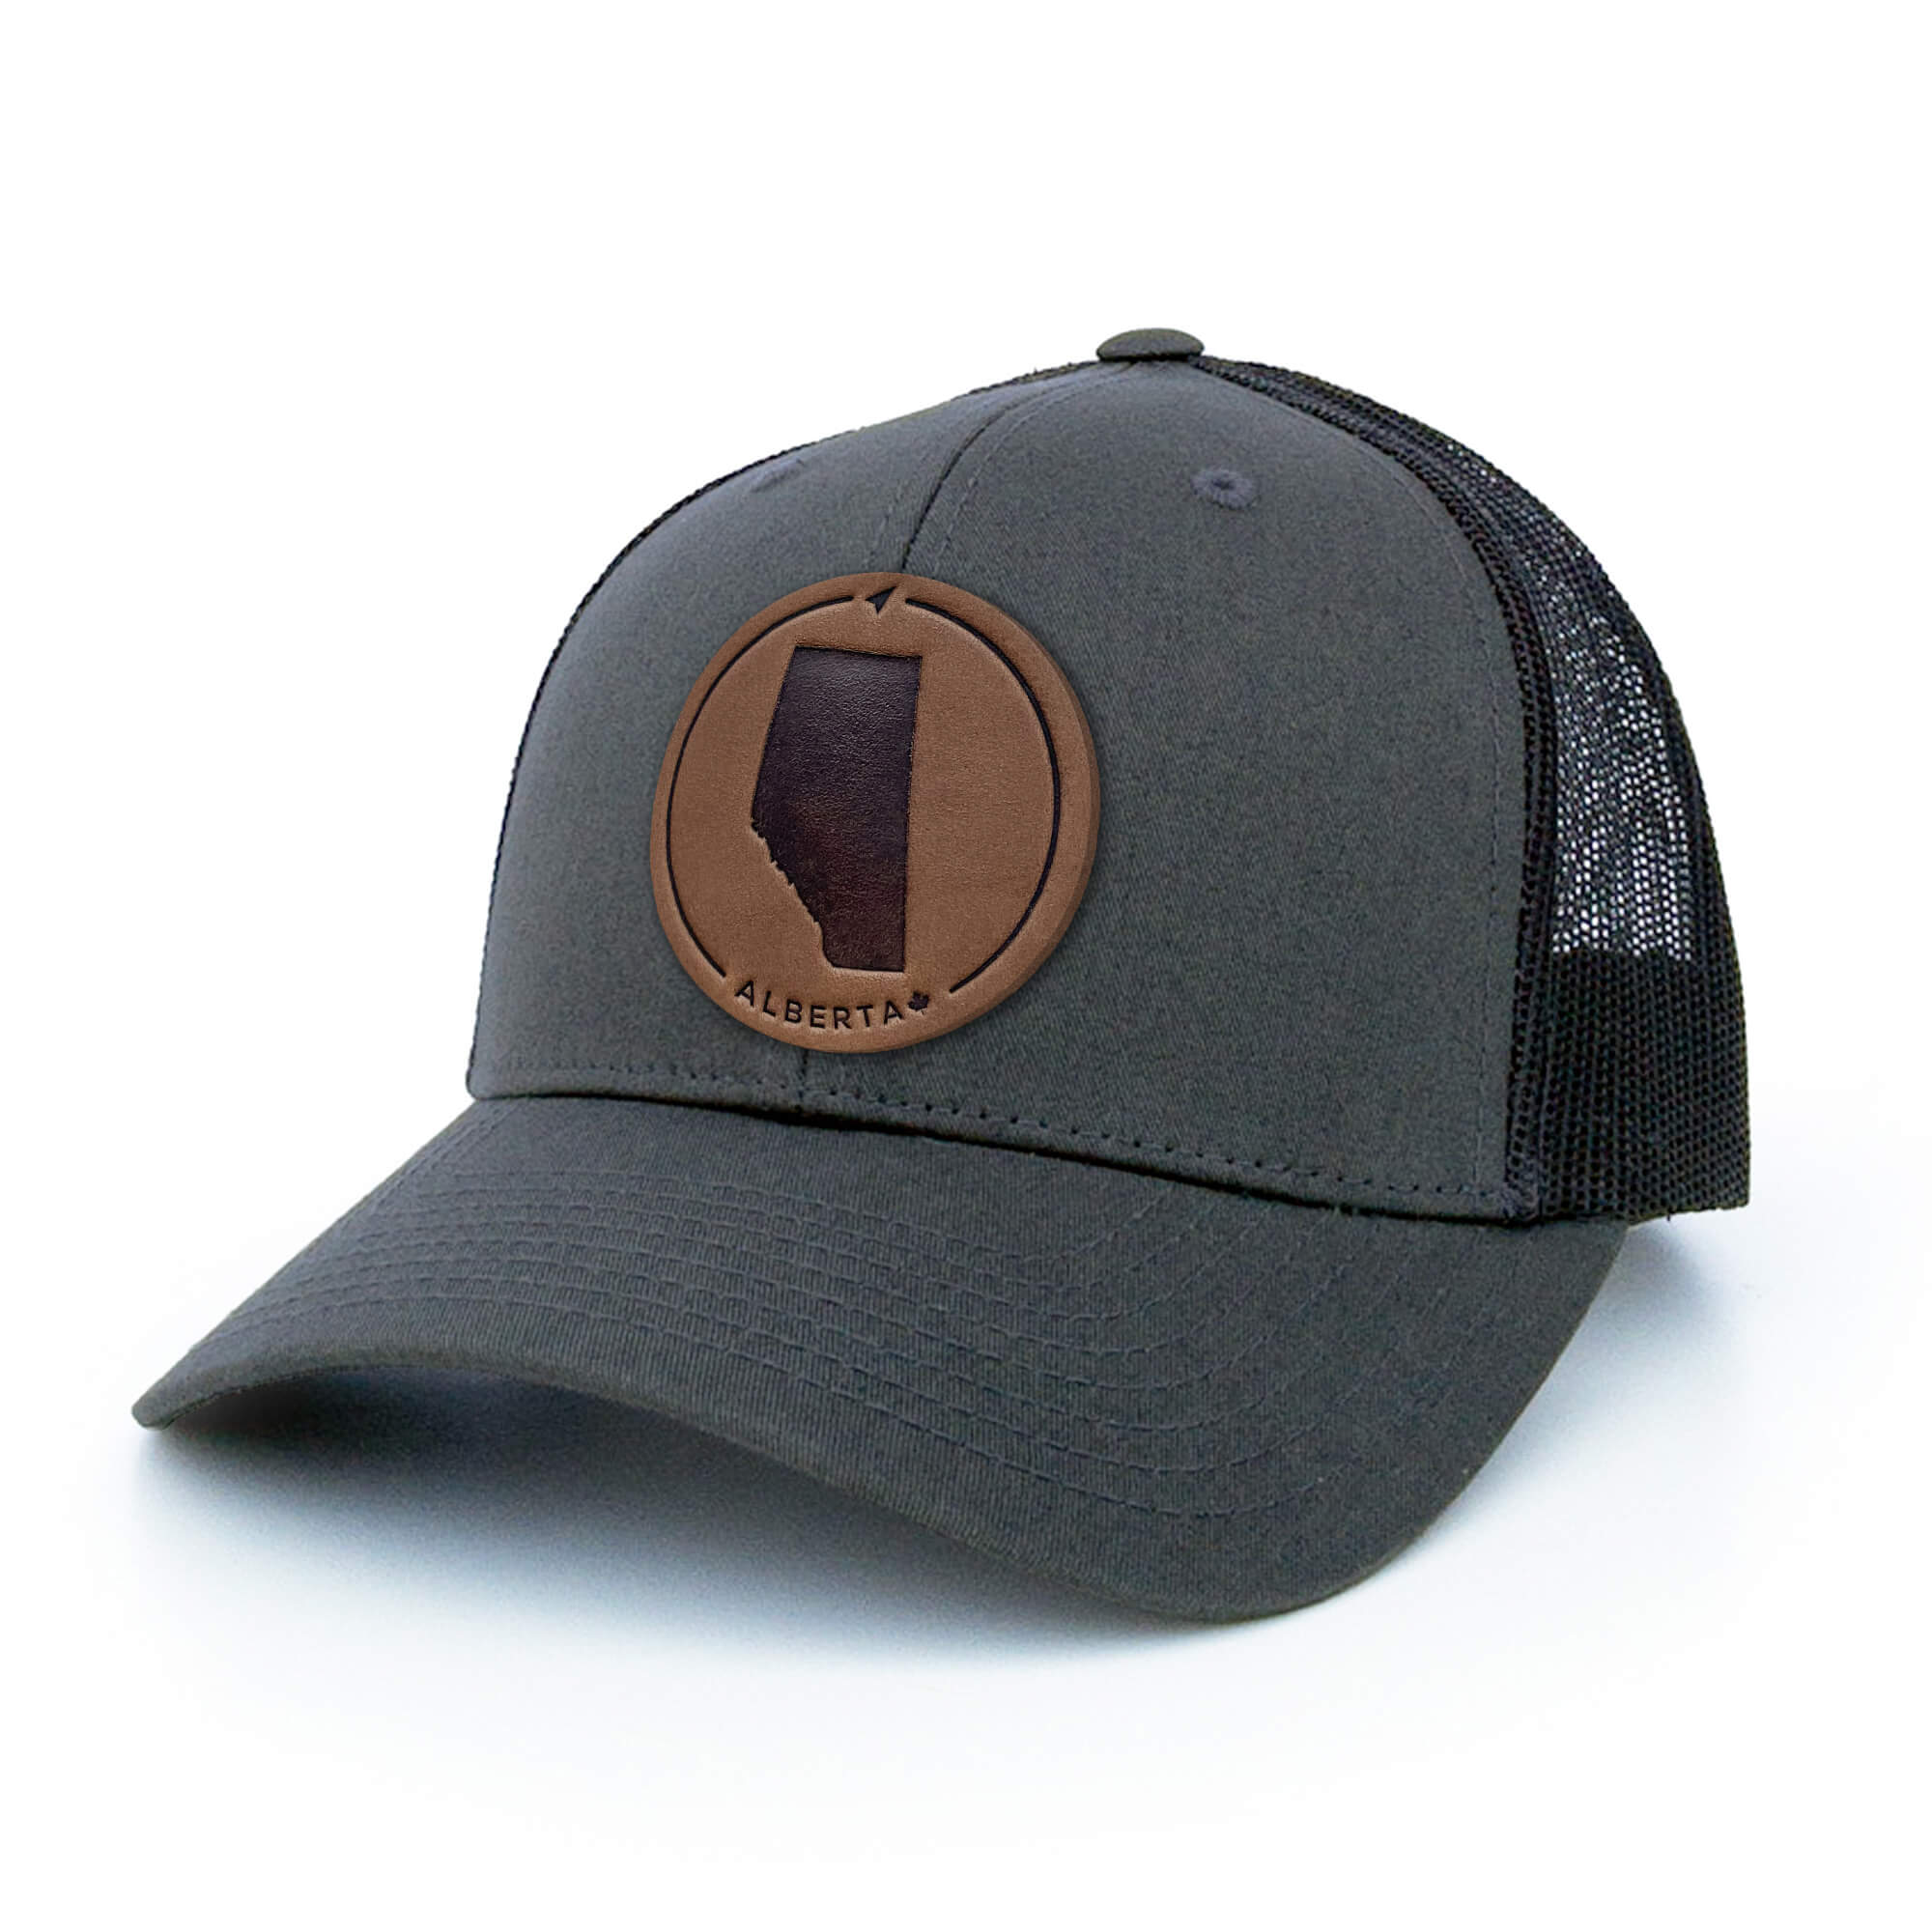 Charcoal trucker hat with full-grain leather patch of Alberta | BLACK-002-005, CHARC-002-005, NAVY-002-005, HGREY-002-005, MOSS-002-005, BROWN-002-005